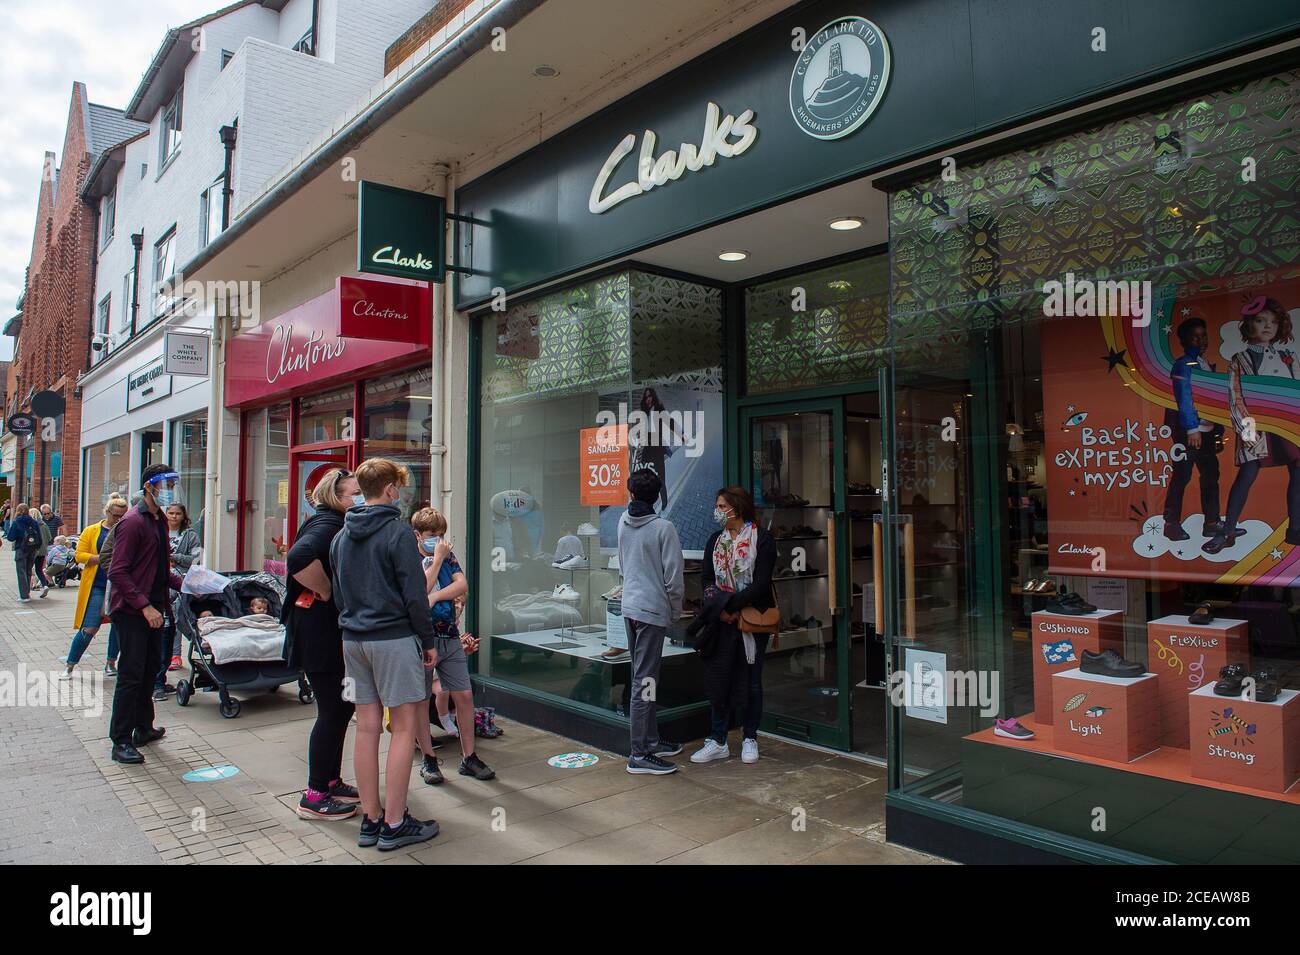 Clarks Shoes Shop High Resolution Stock Photography and Images - Alamy